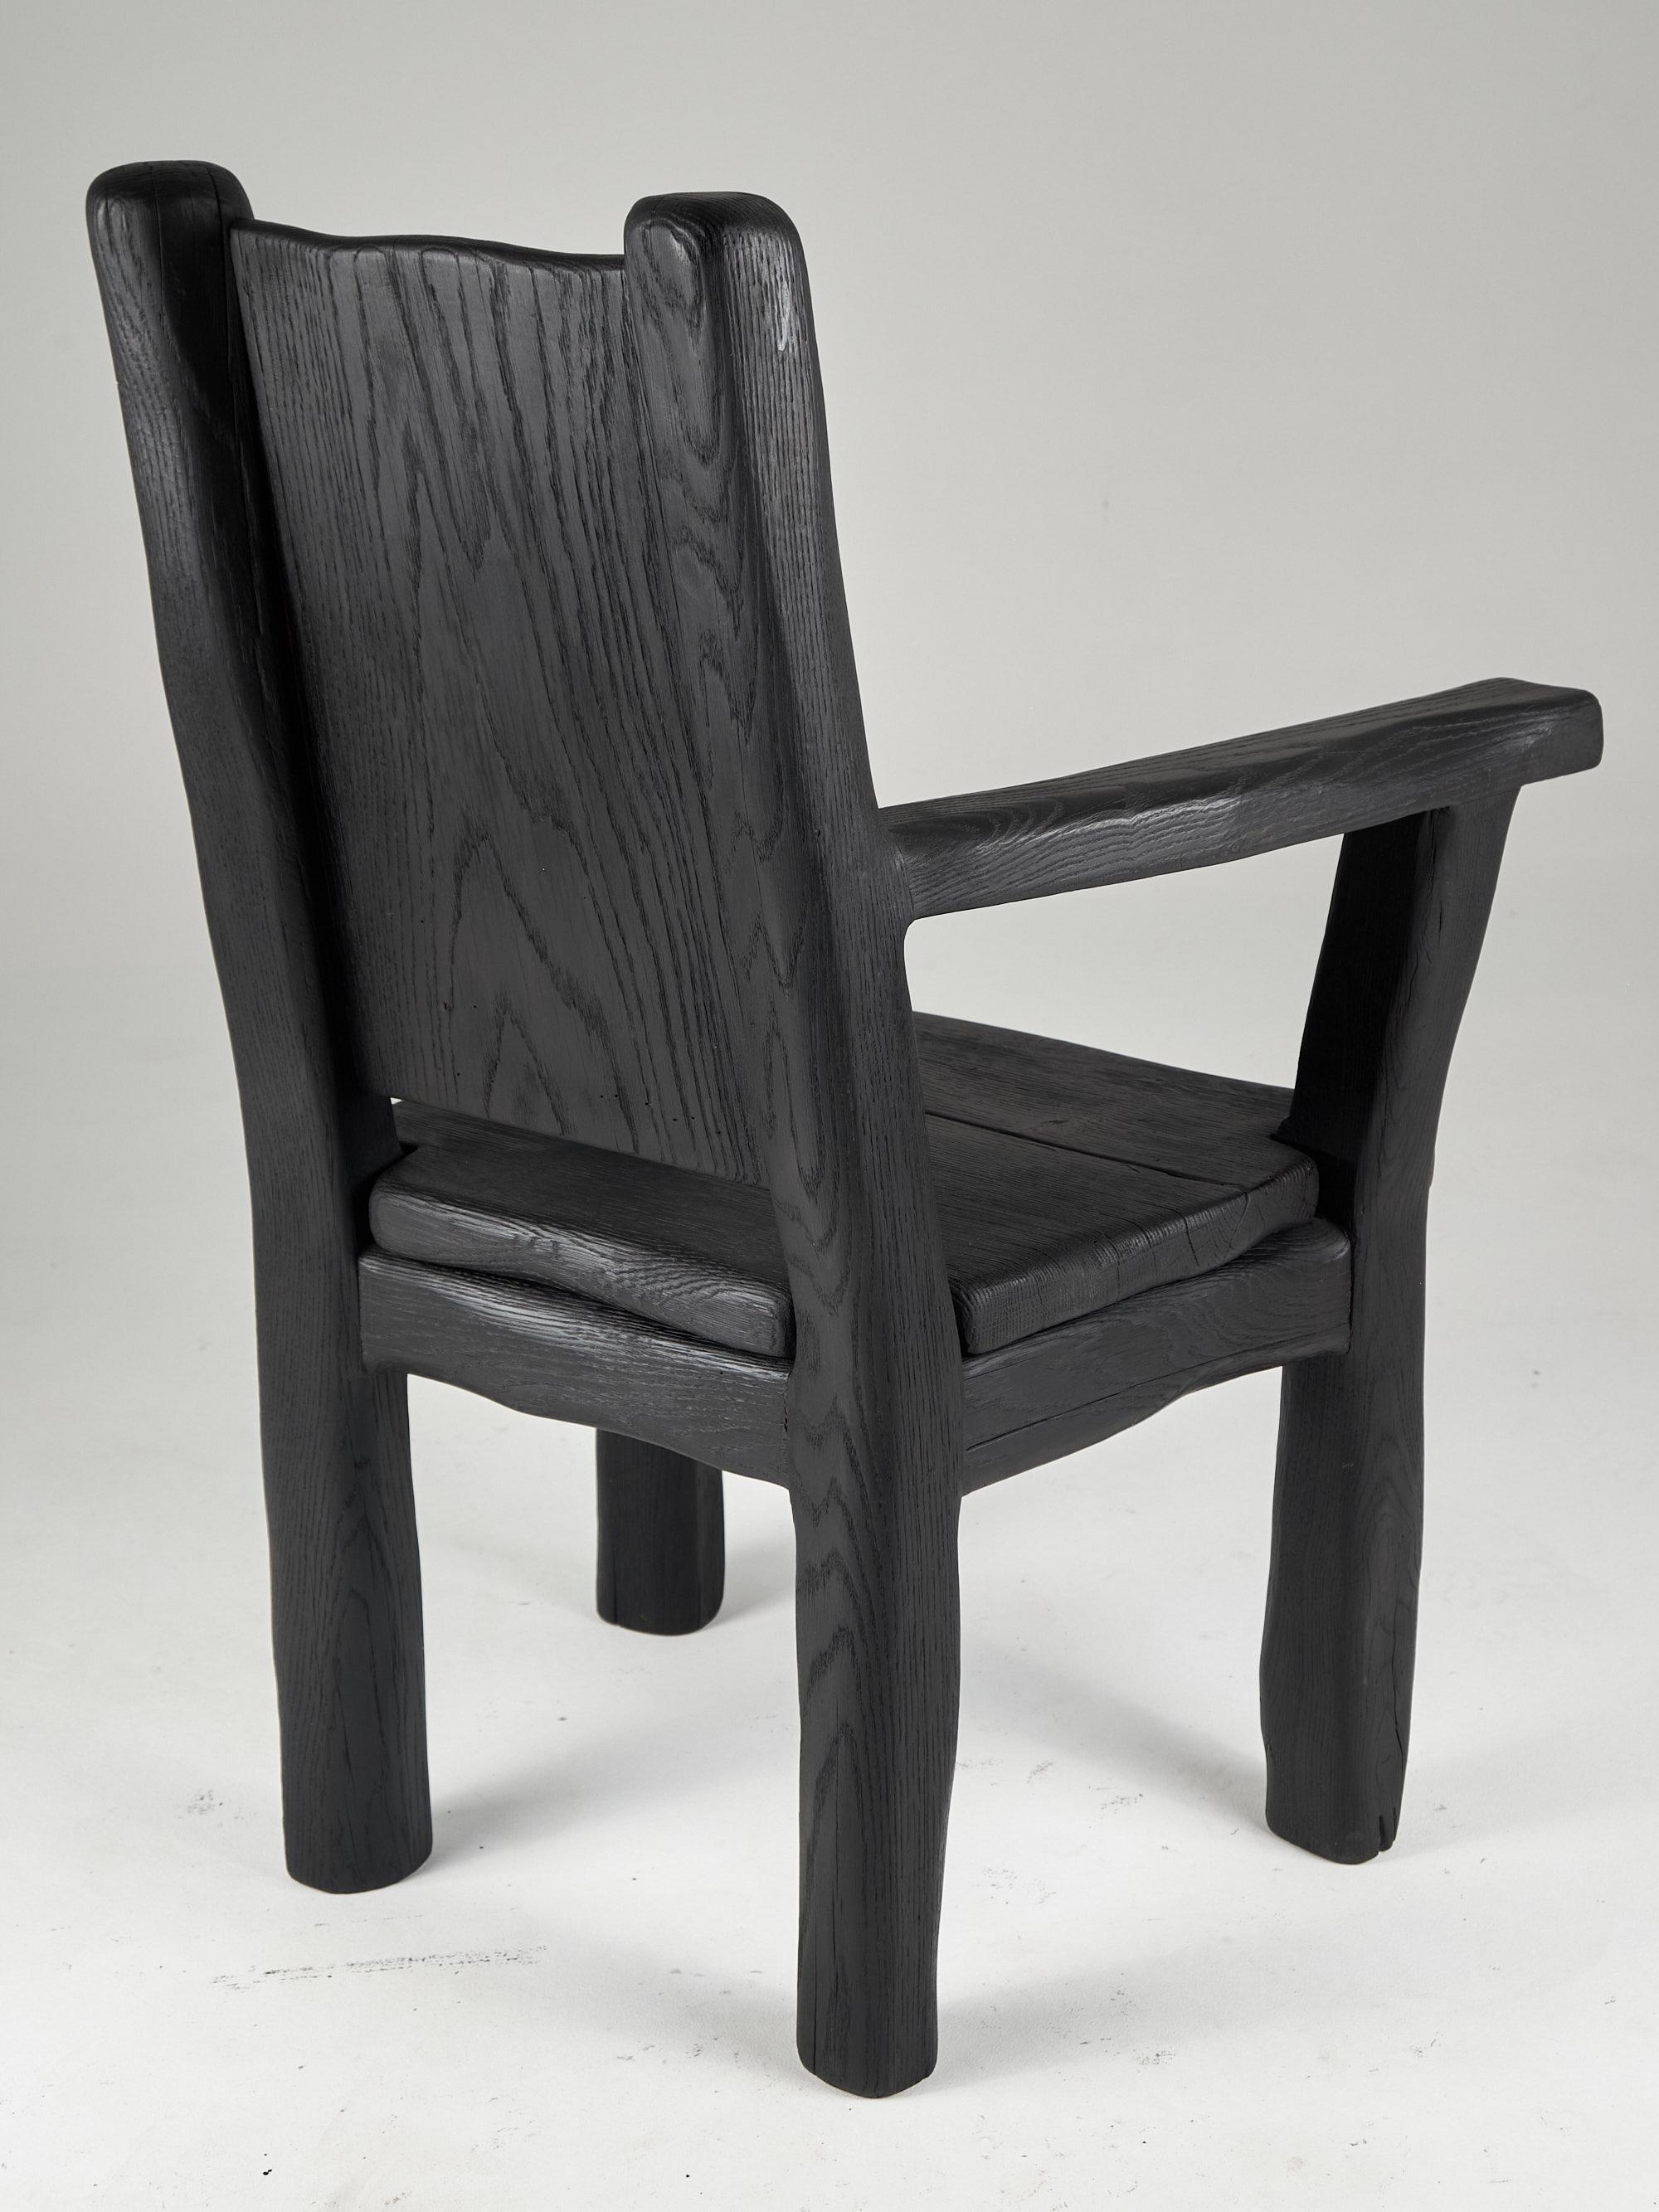 Massive Oak Armchair, Rustic, Burnt Black, For Generations to Last For Sale 2